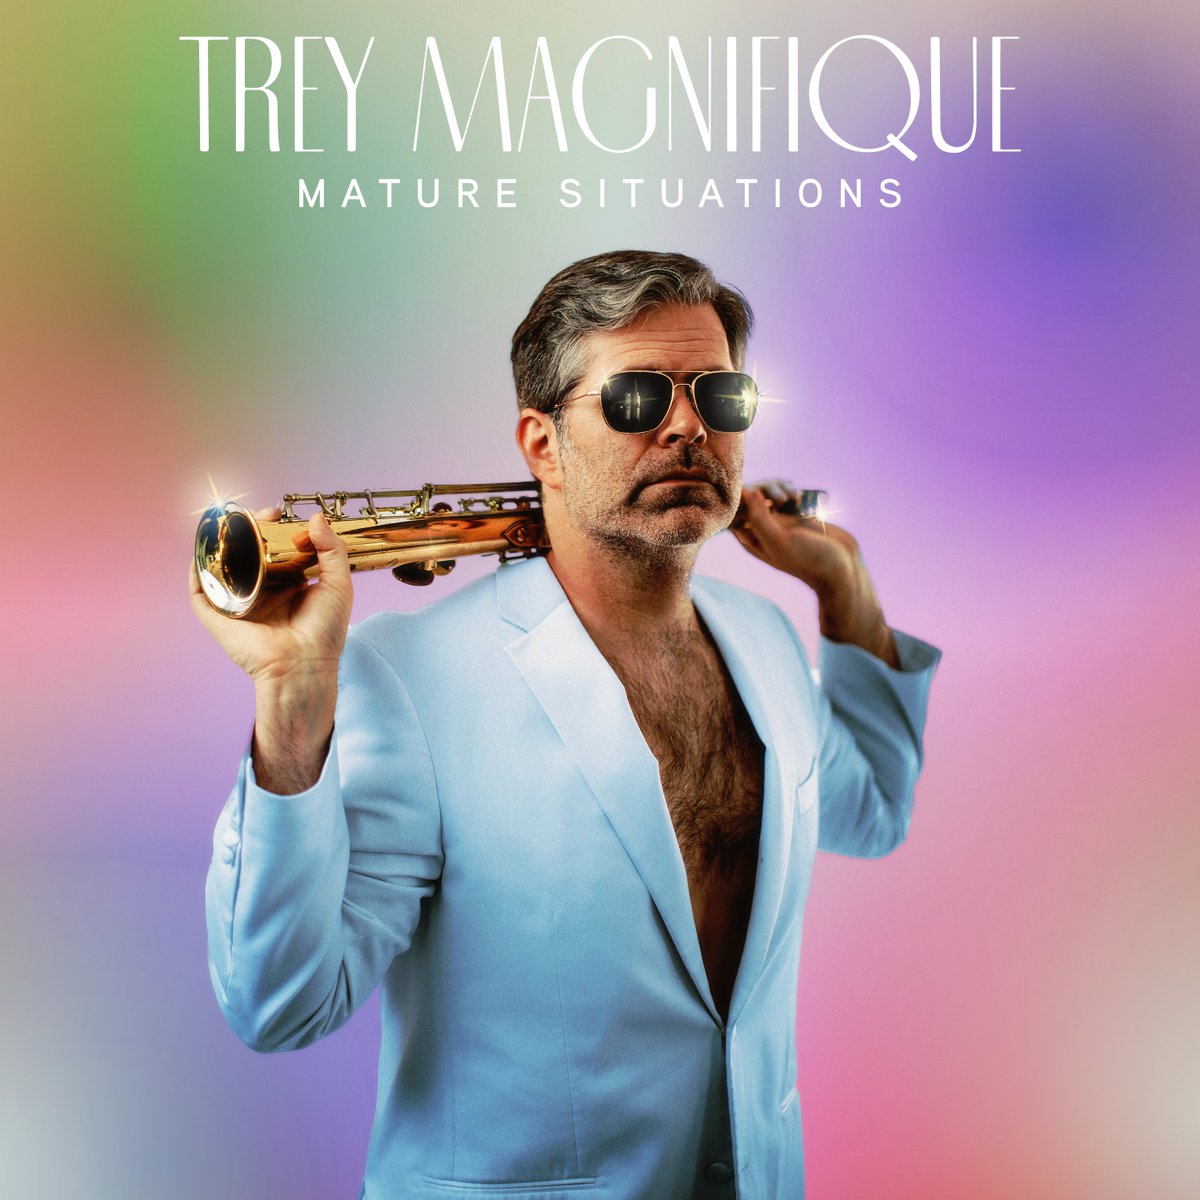 Bandcamp Friday (today) is a great day to get my smooth jazz album! 100% of what you spend on Bandcamp today goes to the artist. Or come see me @TWRPband & @nelward64 tonight in Brooklyn and get one in person! treymagnifique.bandcamp.com